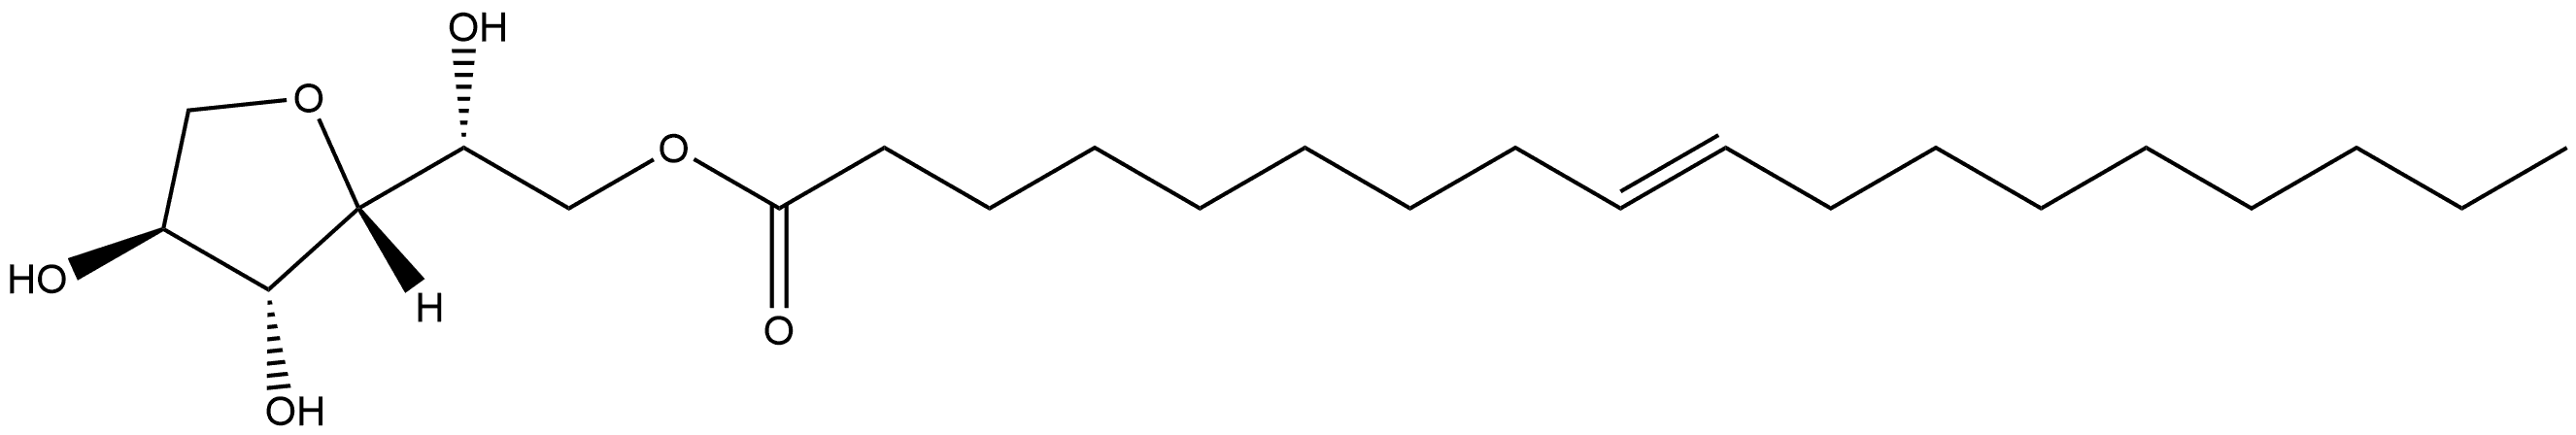 123877-56-5 D-Glucitol, 1,4-anhydro-, 6-(9E)-9-octadecenoate